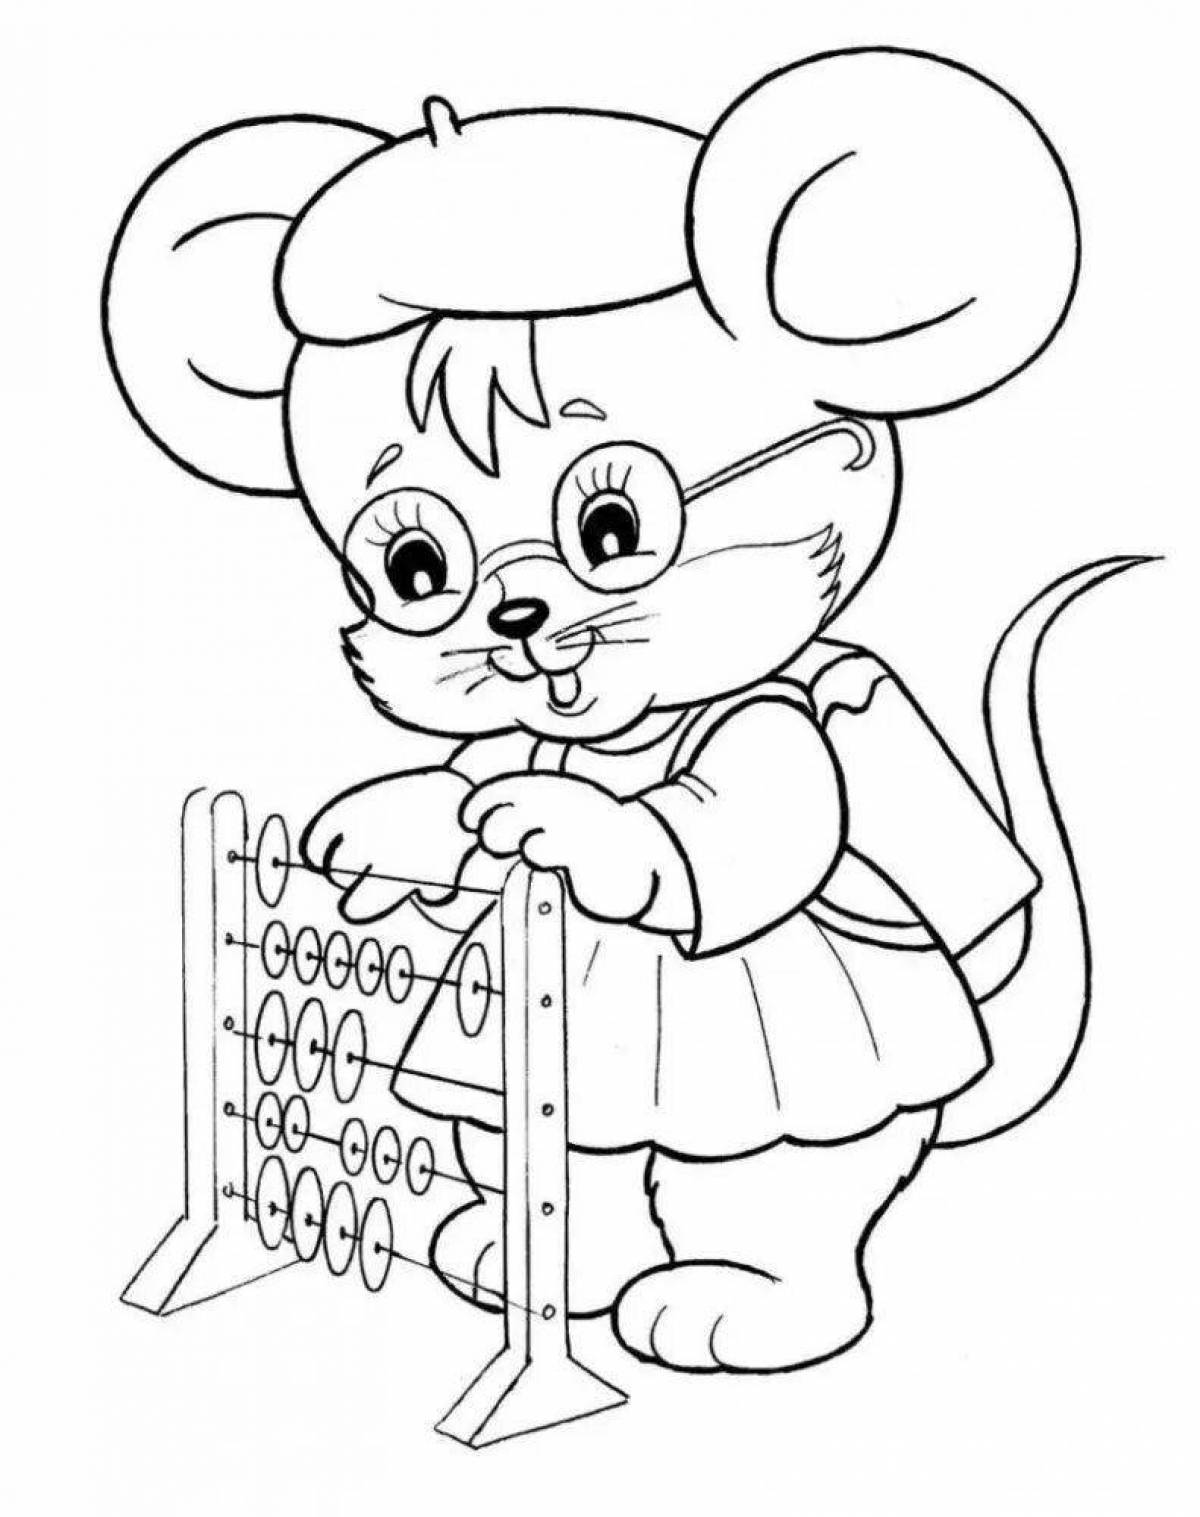 Coloring page playful mouse and bear